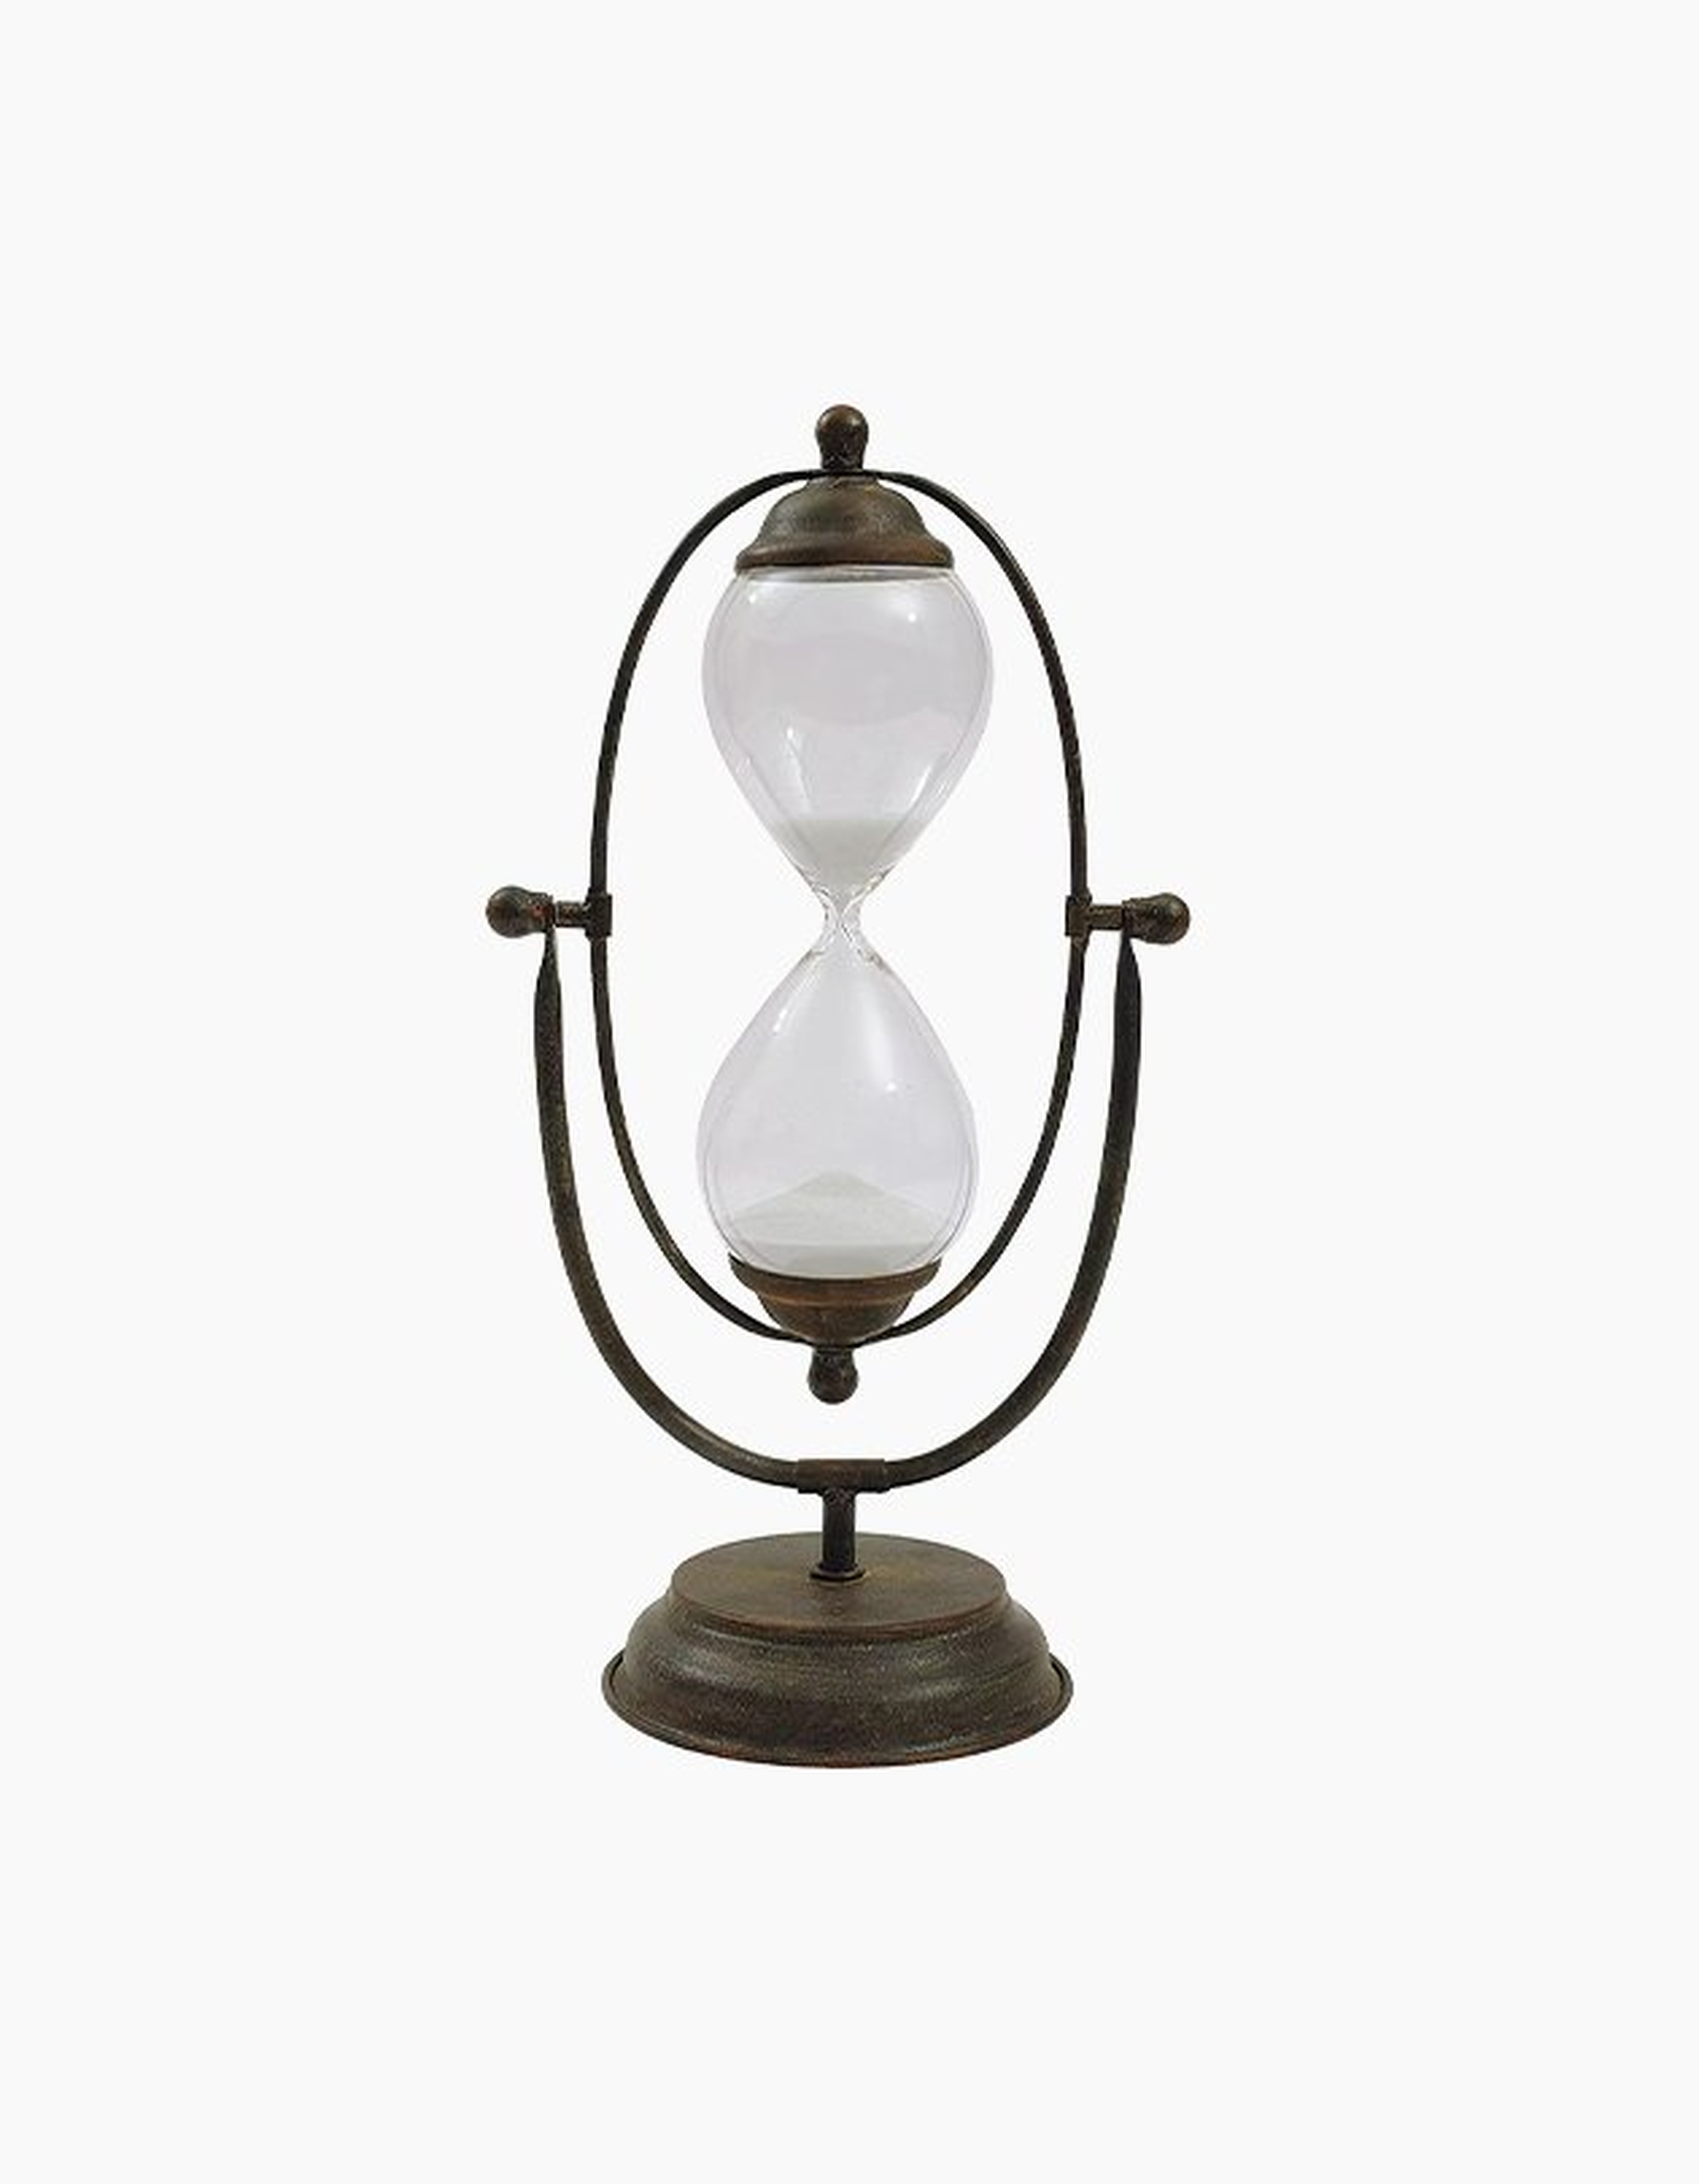 Decorative Rust Color Metal Hourglass with White Sand - Nomad Home